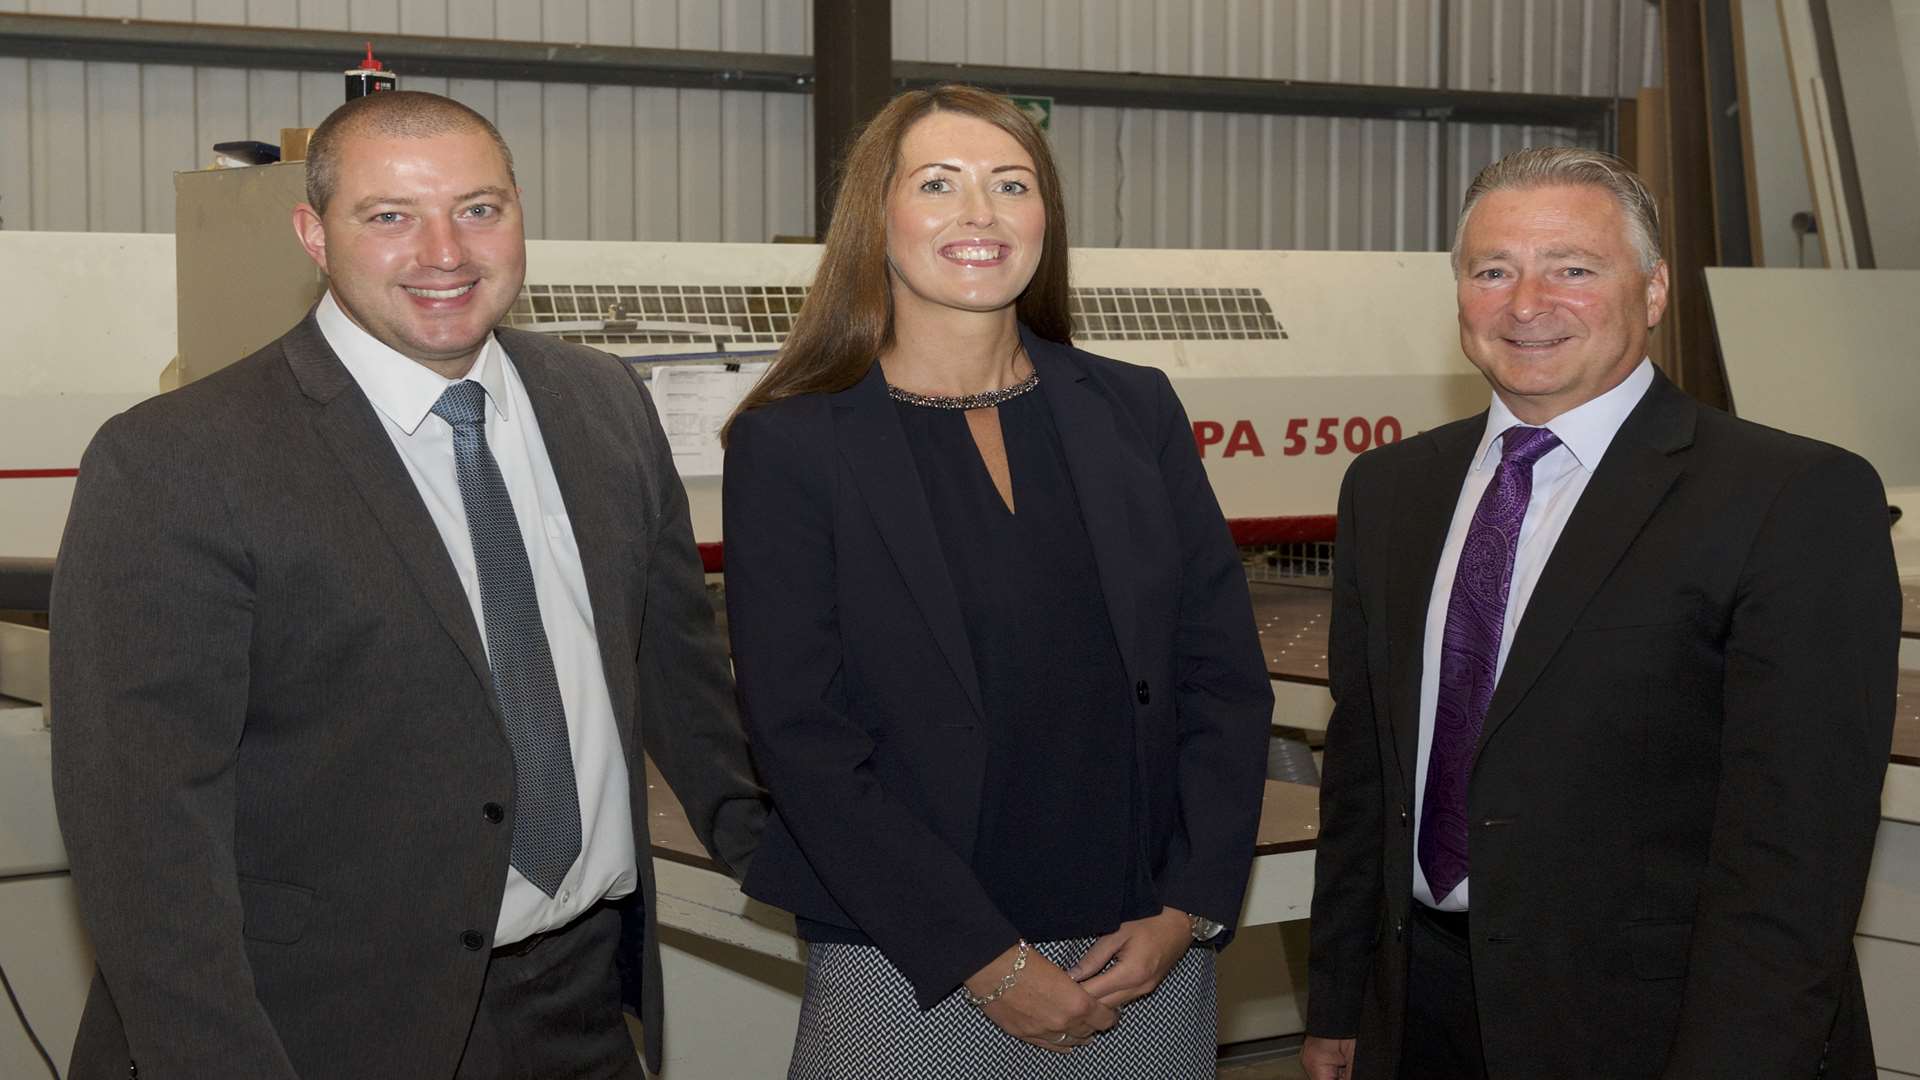 From left, Paul Green of Lloyds Bank, Nicky Taylor of Lloyds Bank Commercial Finance and Trevor Gillman, managing director at David Bailey Furniture Systems. Picture: Stella Pictures Limited